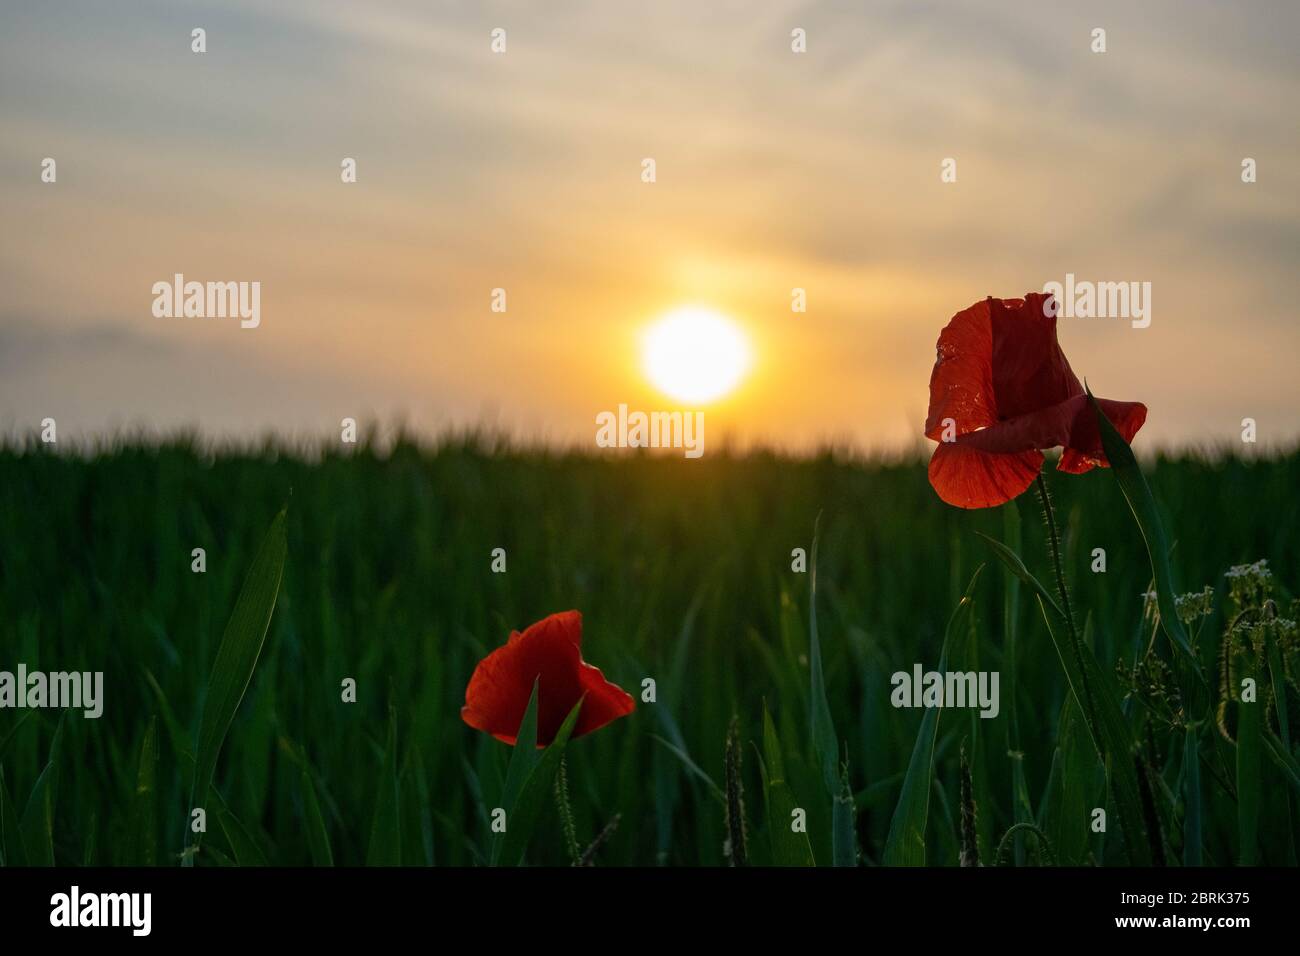 A pair of red poppies with the sun shining through the petals, against a blurred background of a green field on a summer's evening in Norfolk, England Stock Photo